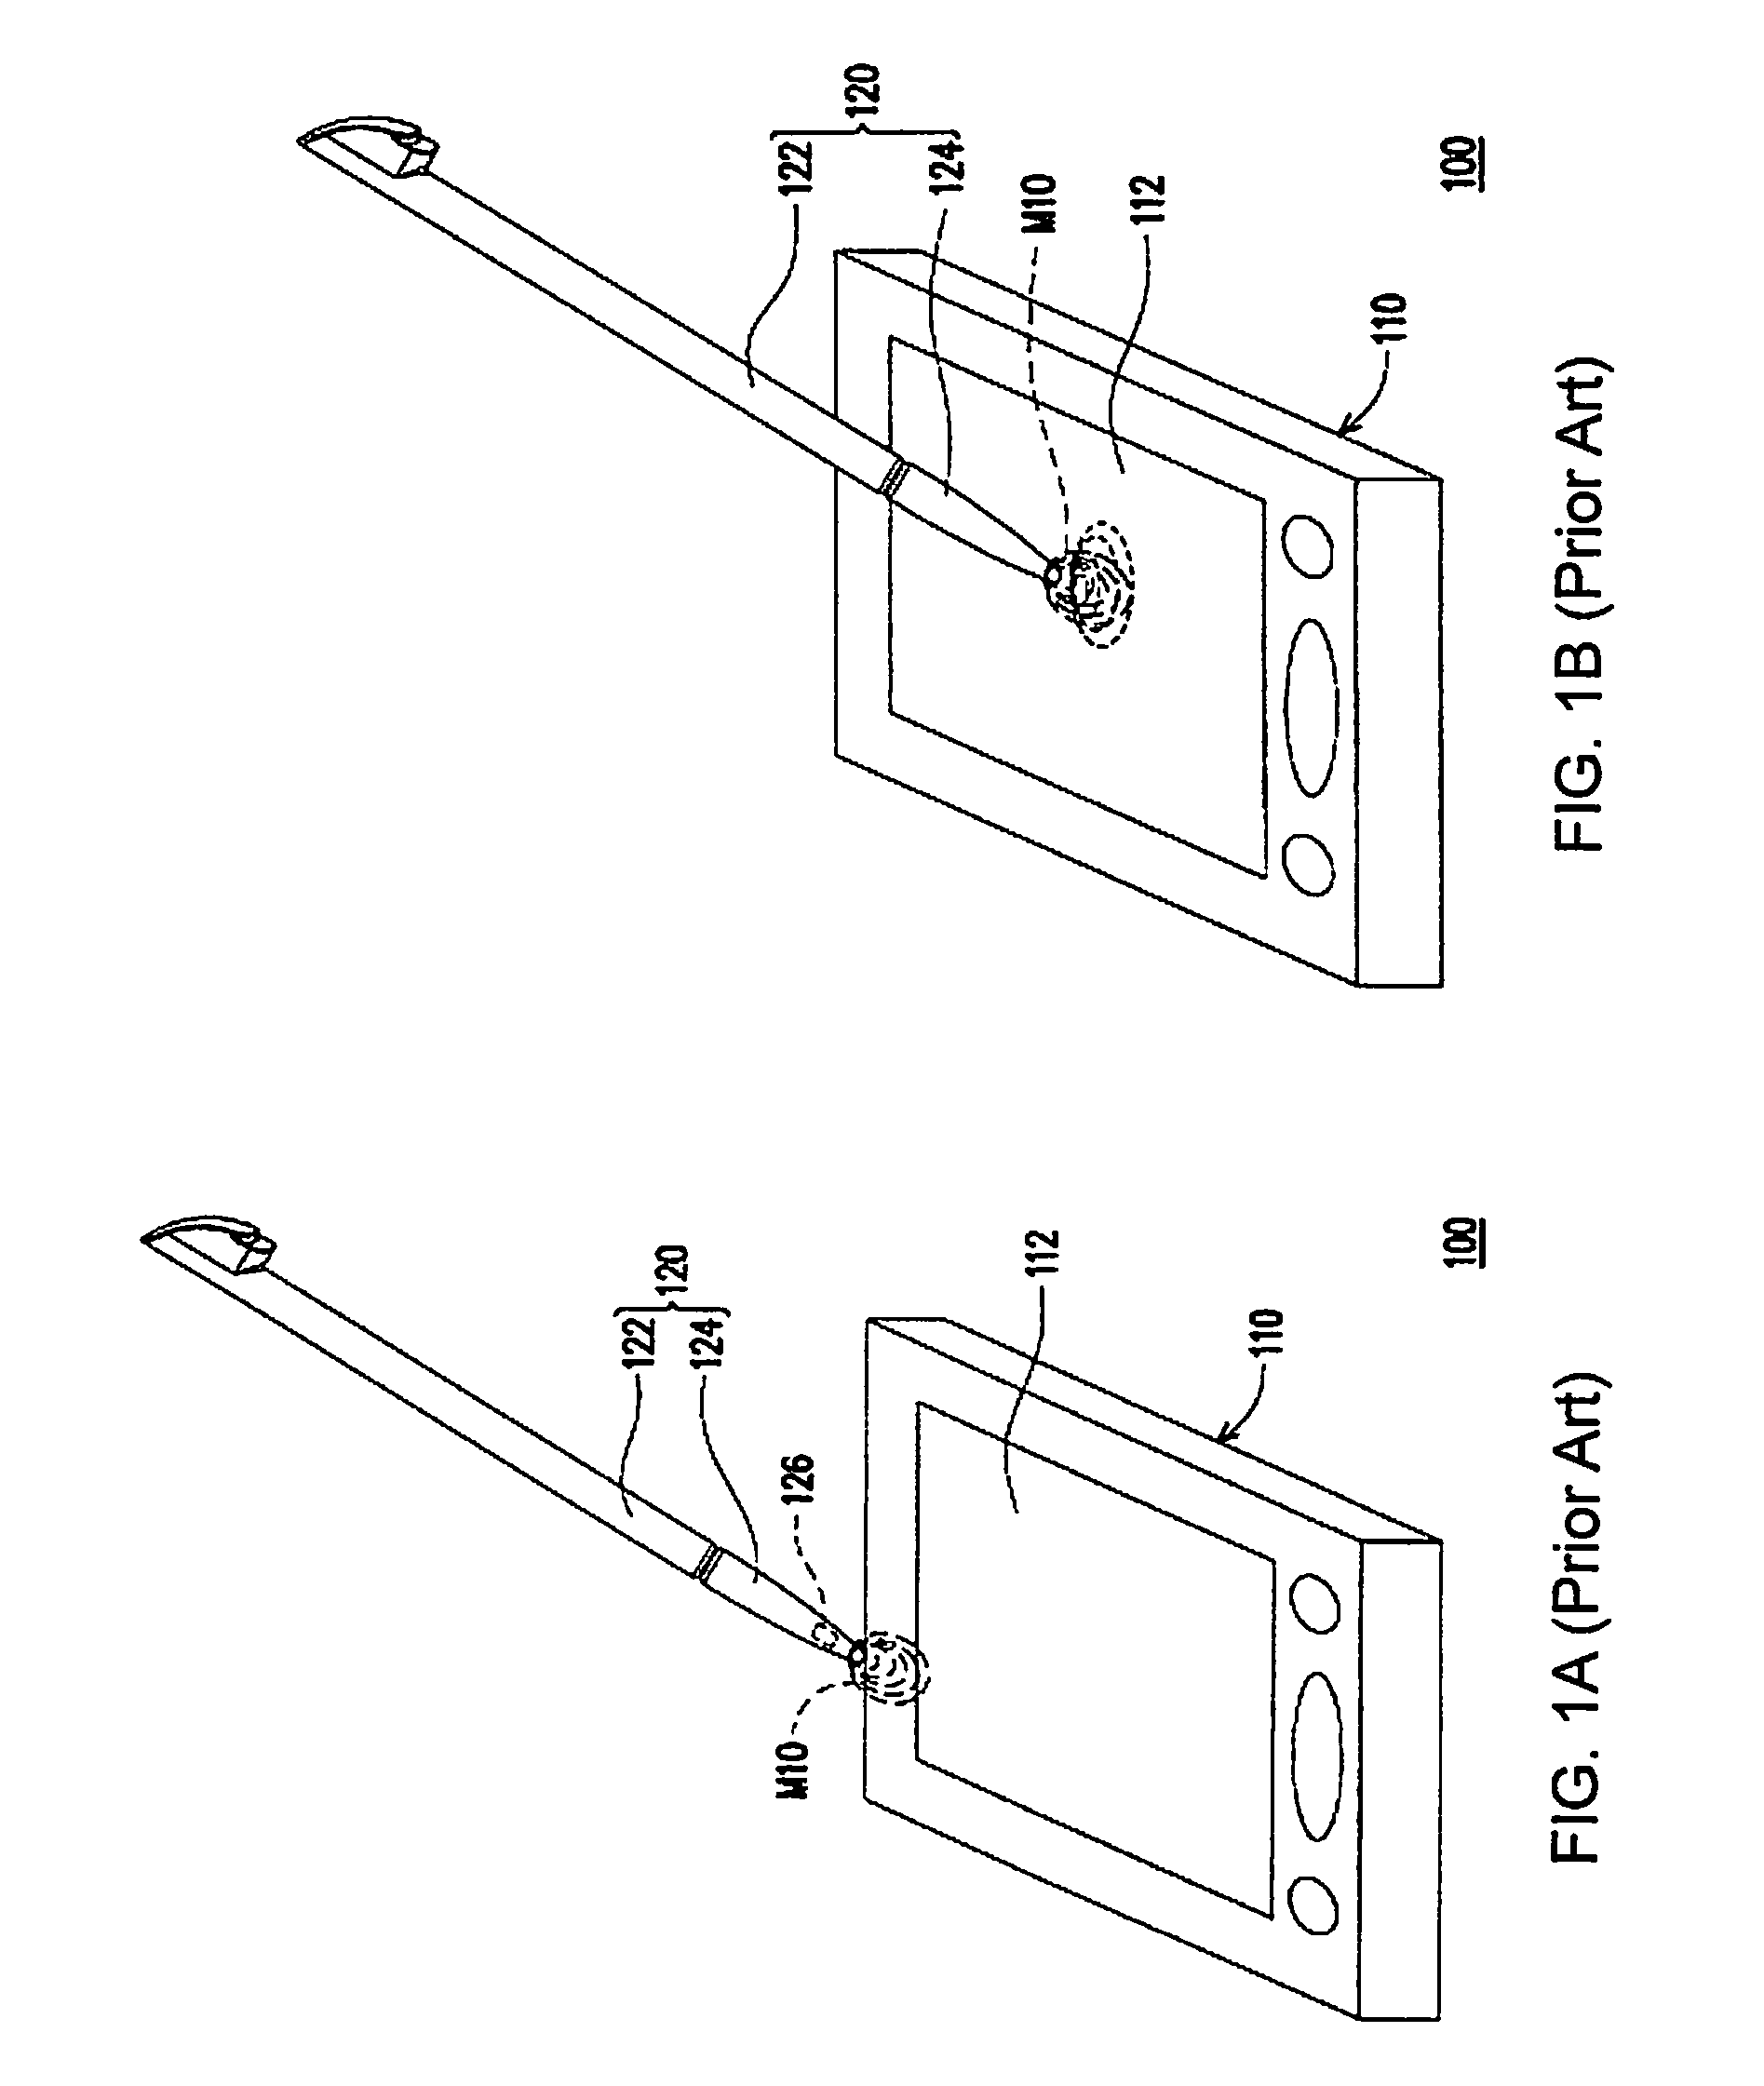 Magnetic Vector Sensor Positioning and Communications System